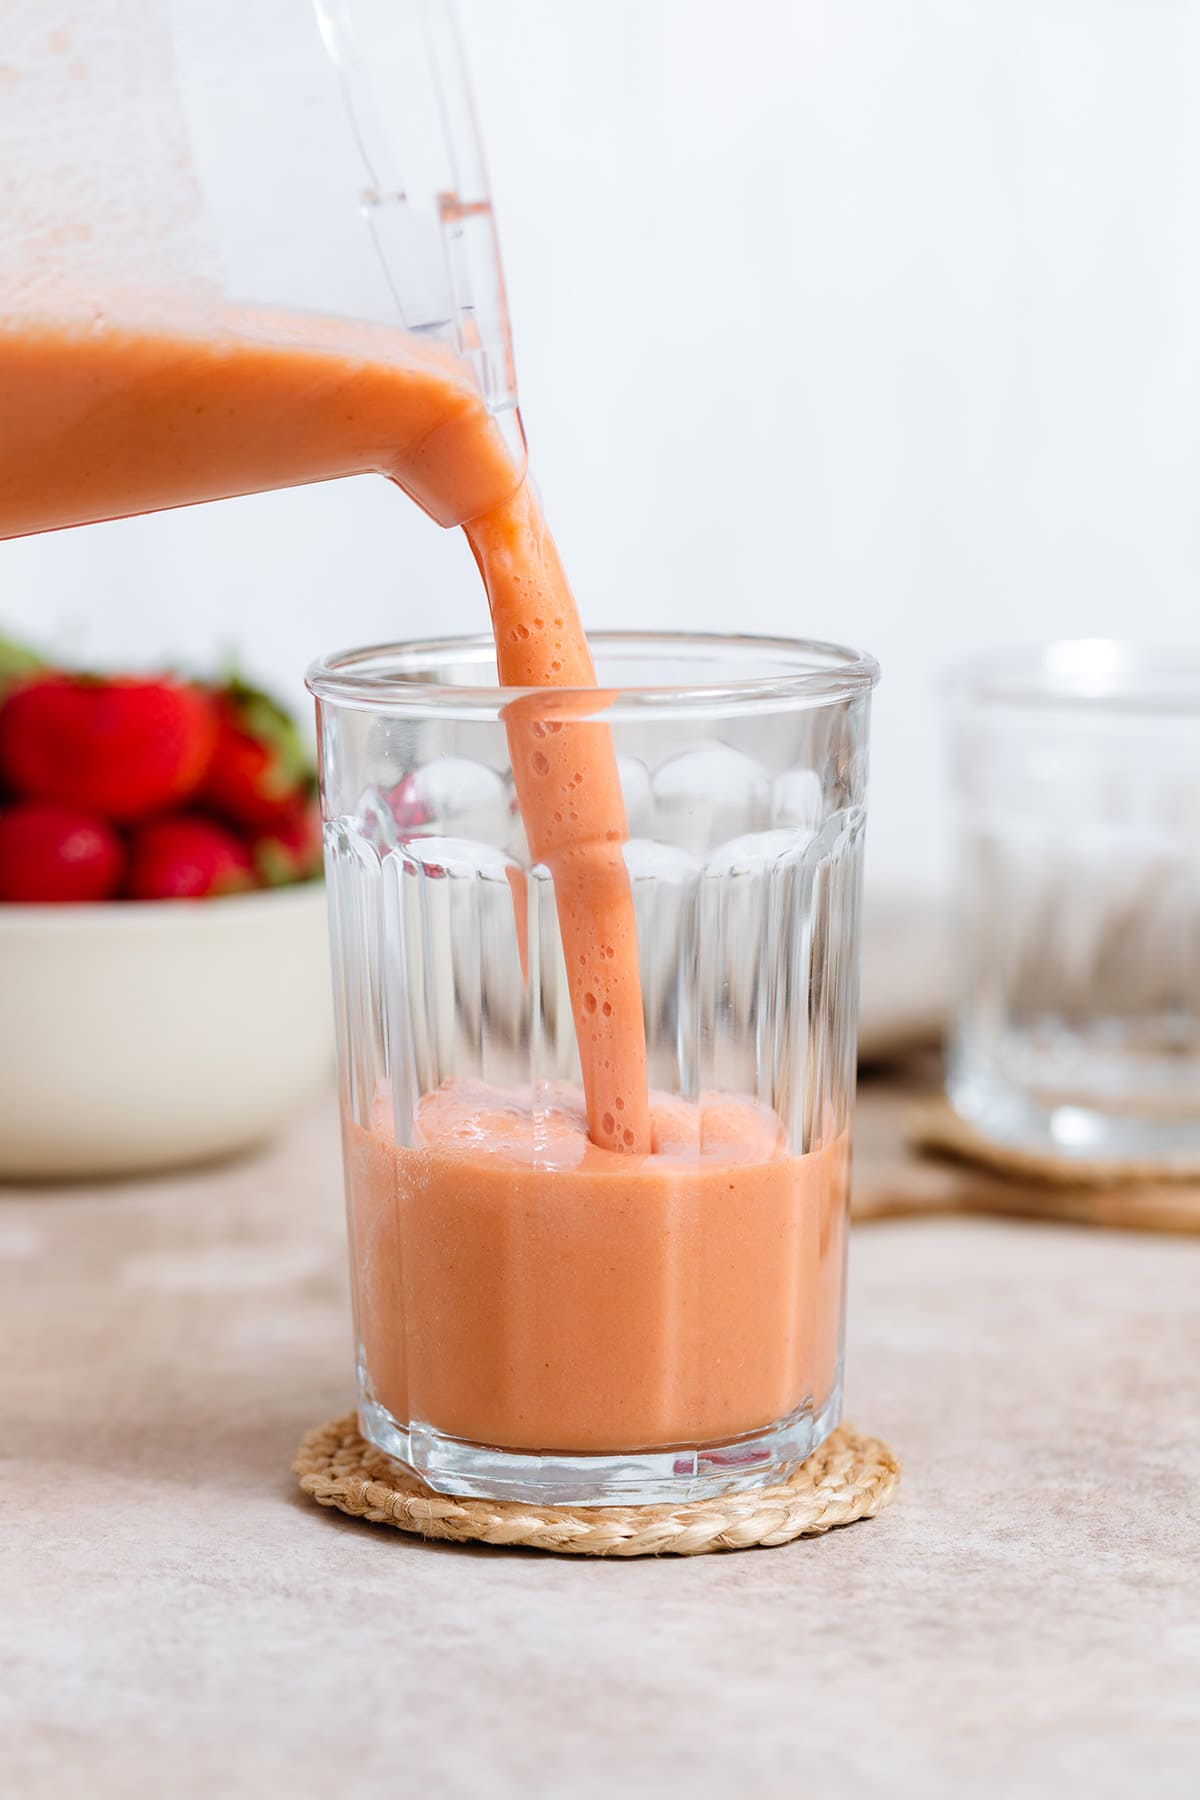 Strawberry peach smoothie being poured into a tall glass on a beige background.